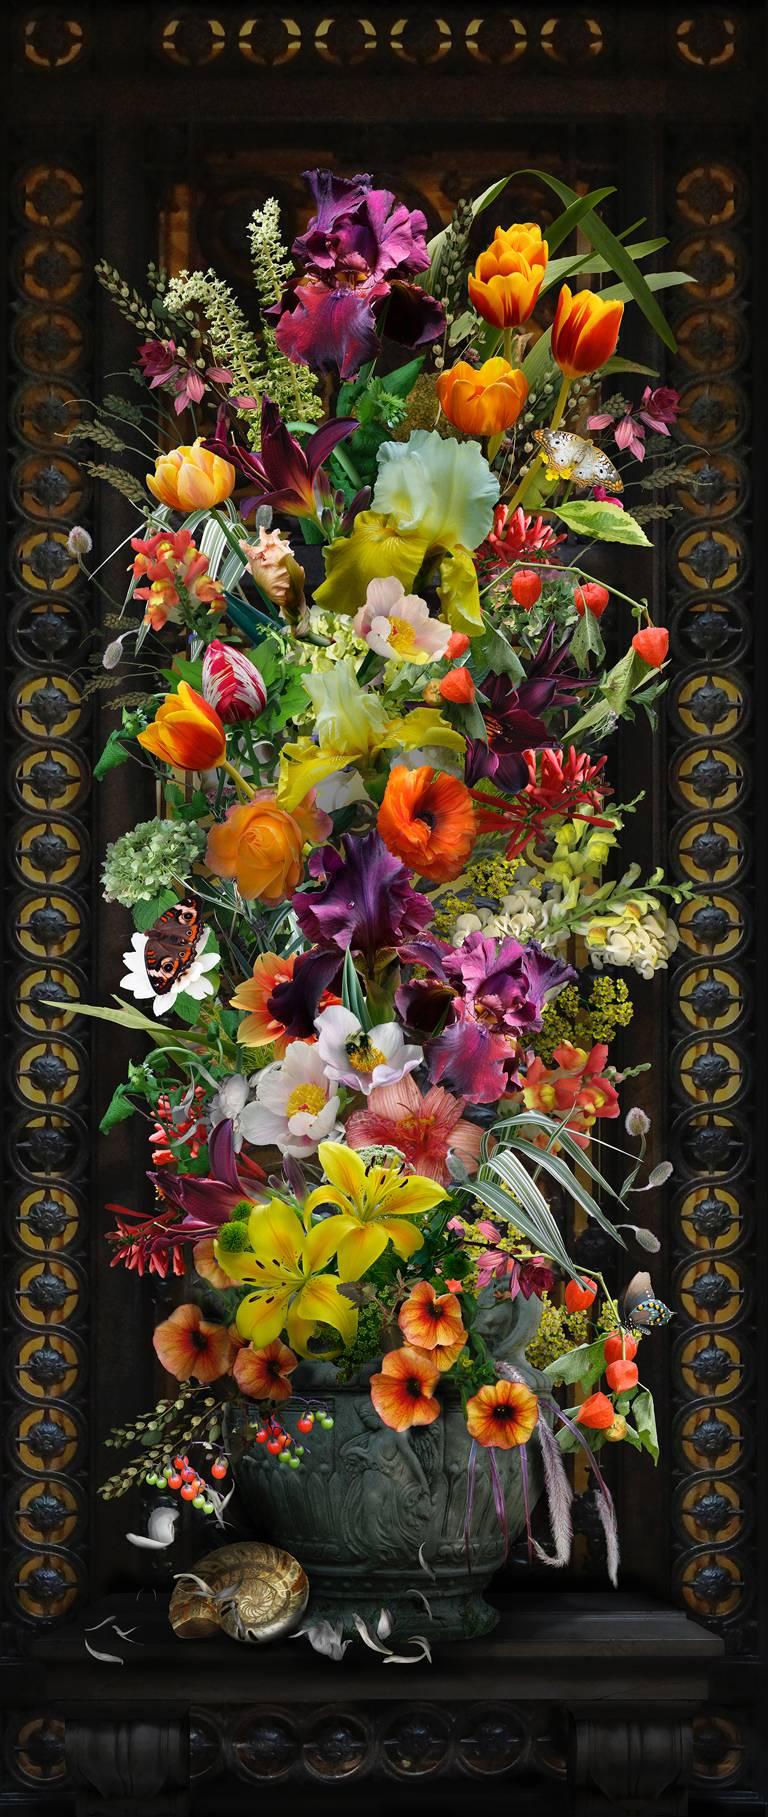 Lisa A. Frank Color Photograph - Ironwork (Vertical Digital Collage Print of Brightly Colored Flowers on Black)